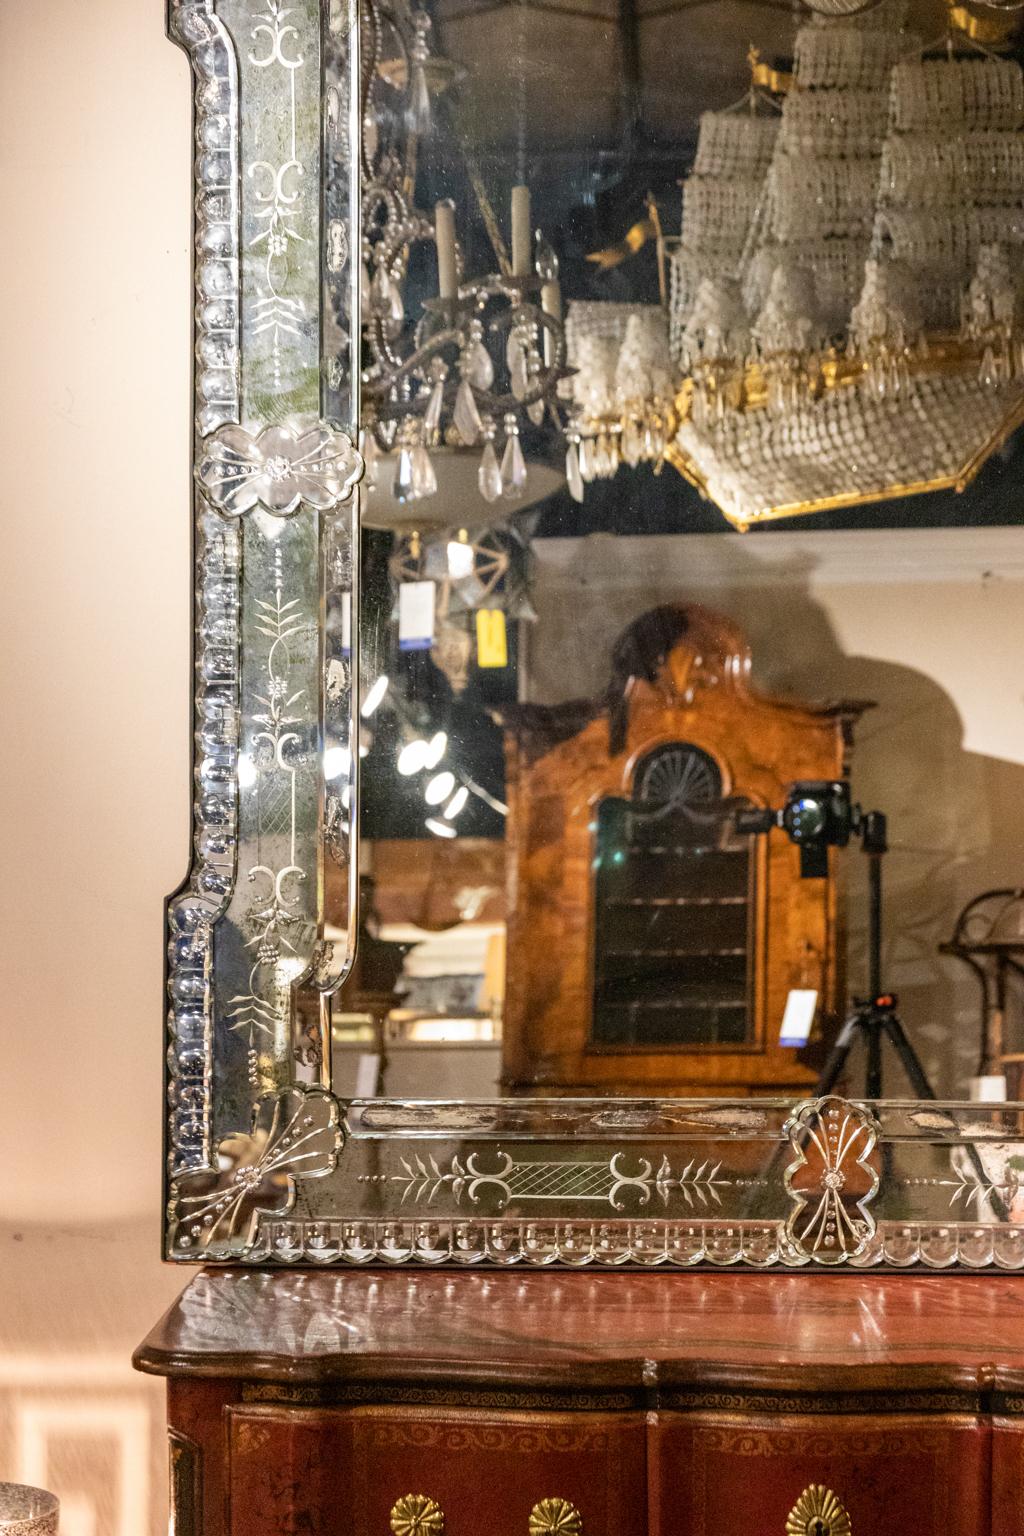 Circa 1920s Venetian mirror of large proportion in excellent state of preservation. The mirror is constructed with etched glass accented with c-scrolls and scalloped trim throughout the perimeter of the frame. Made in either France or Italy. Please